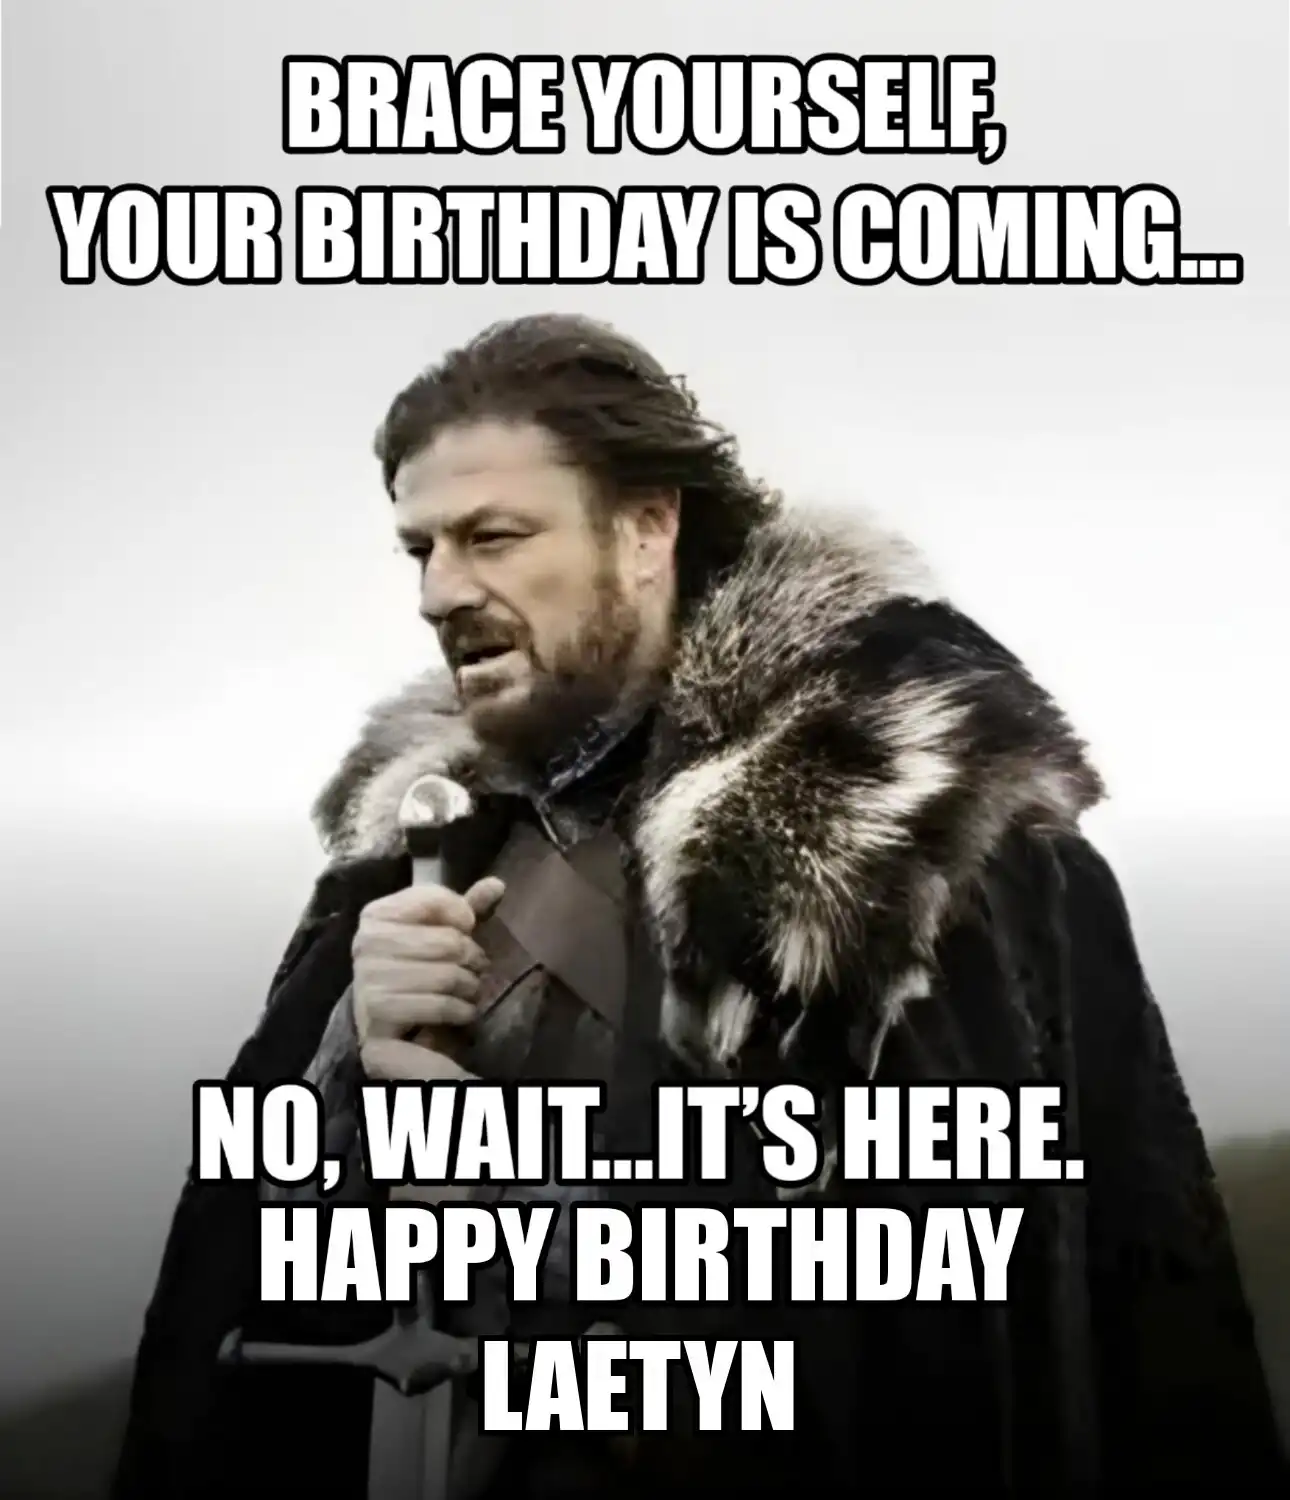 Happy Birthday Laetyn Brace Yourself Your Birthday Is Coming Meme